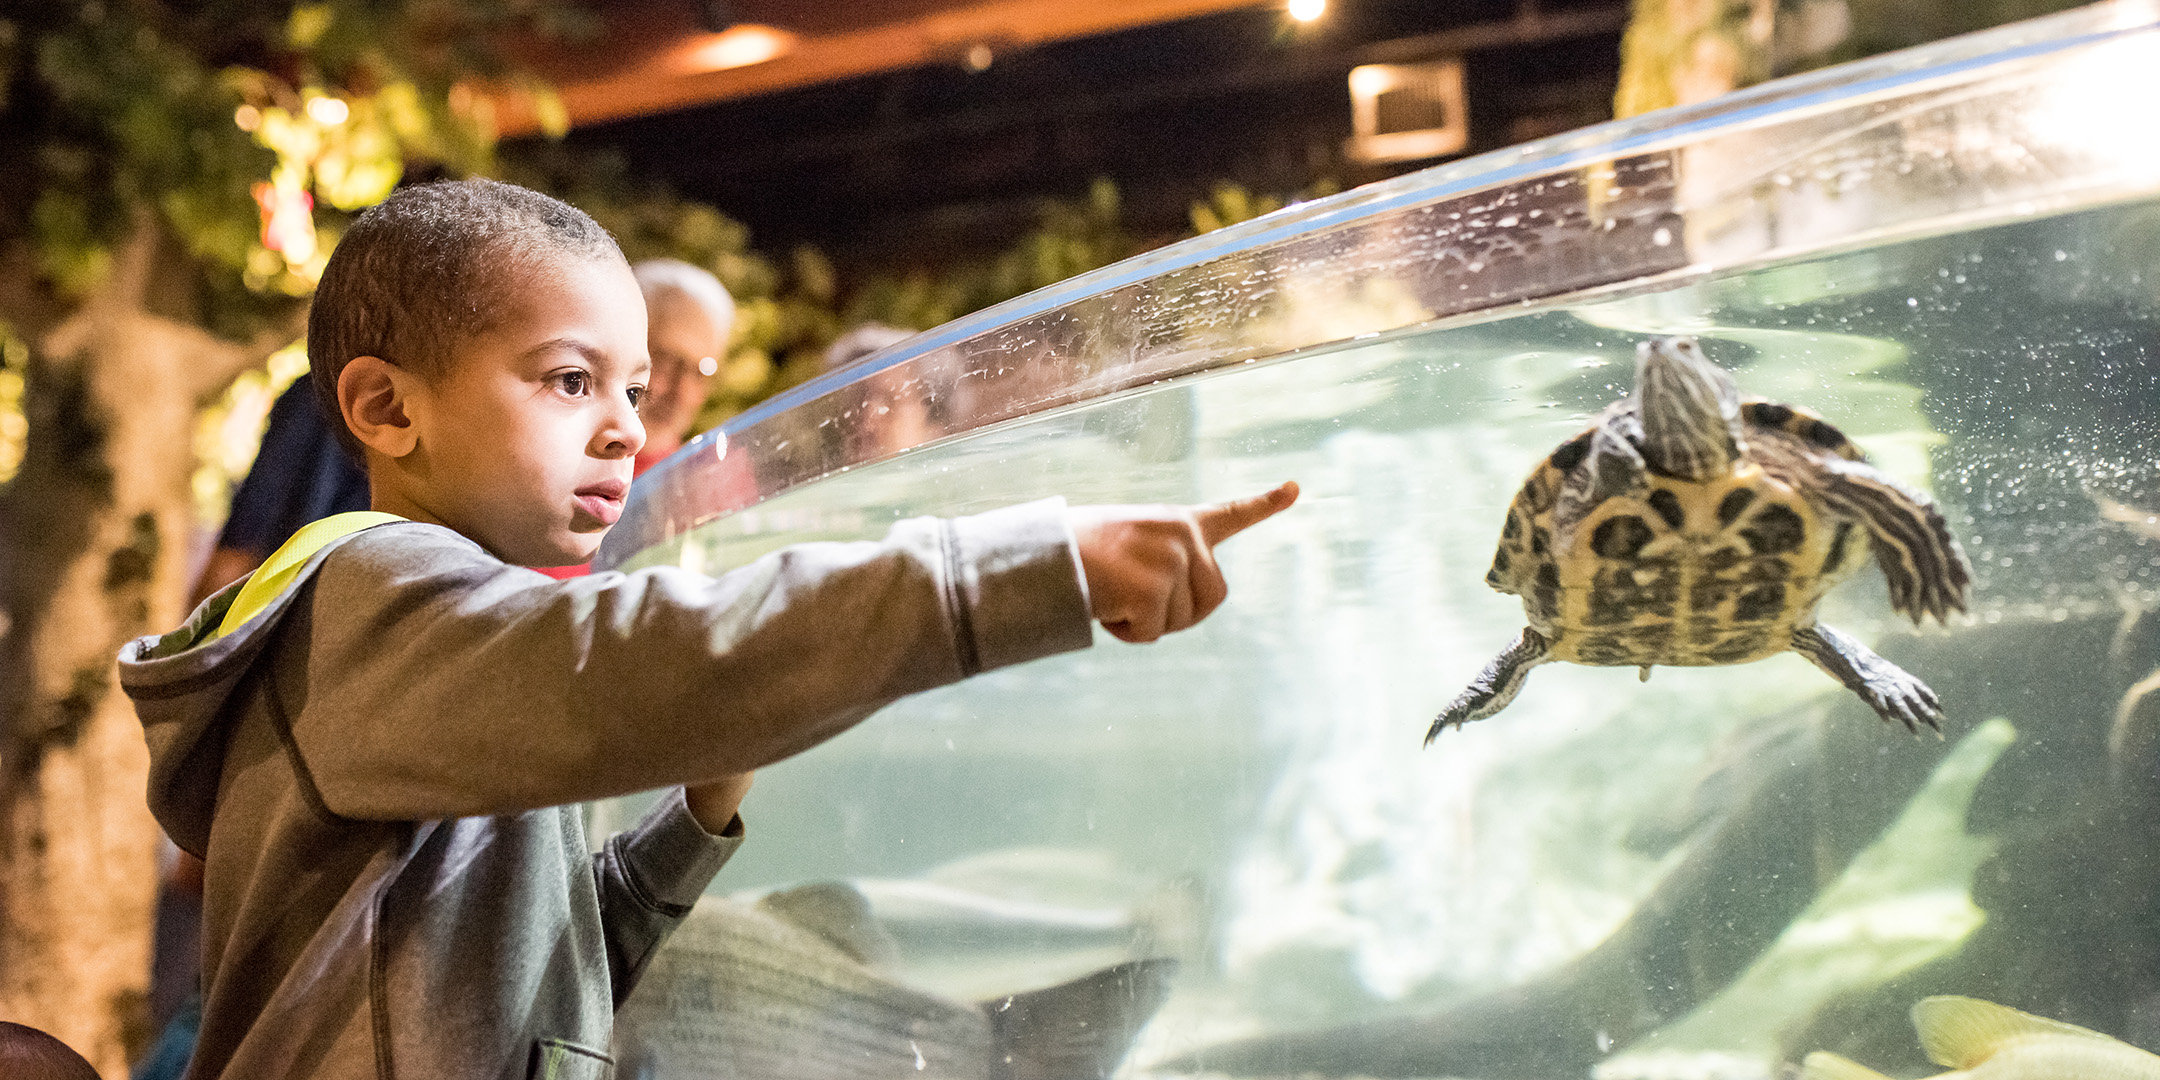 Kid pointing at turtle at Greater Cleveland Aquarium